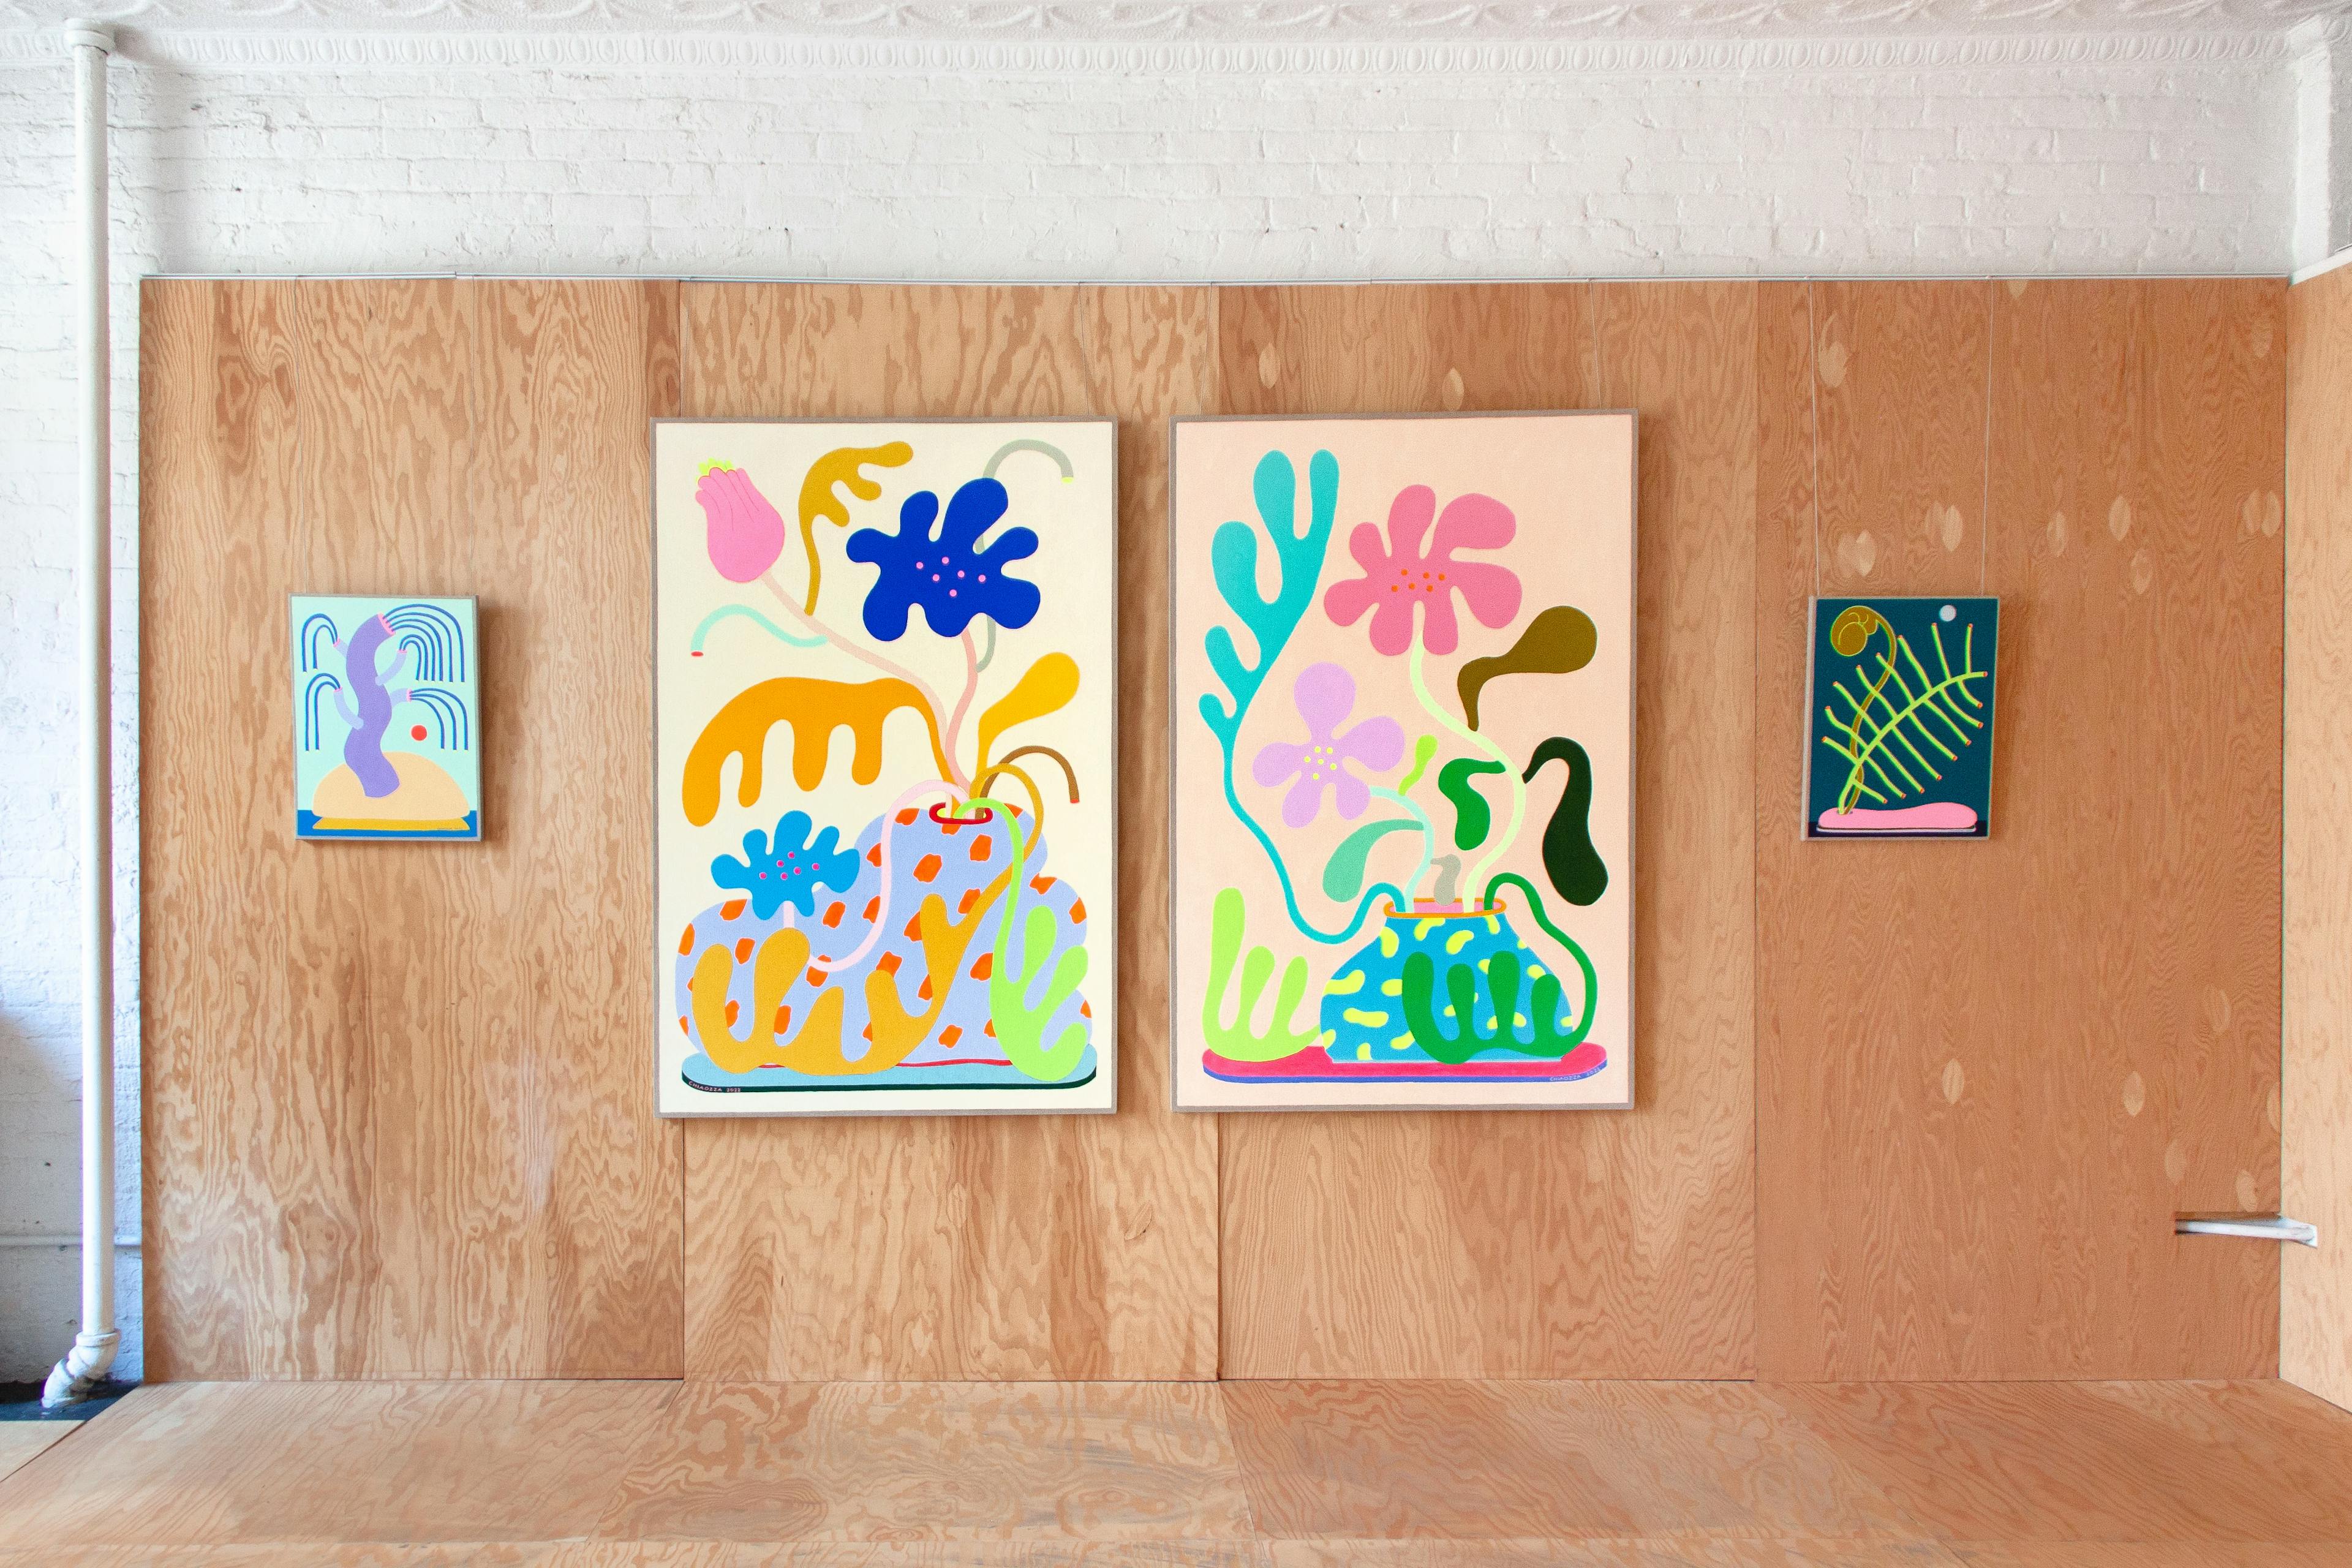 Four abstract floral paintings by CHIAOZZA hanging in a gallery, as part of the exhibition Slow Growth.